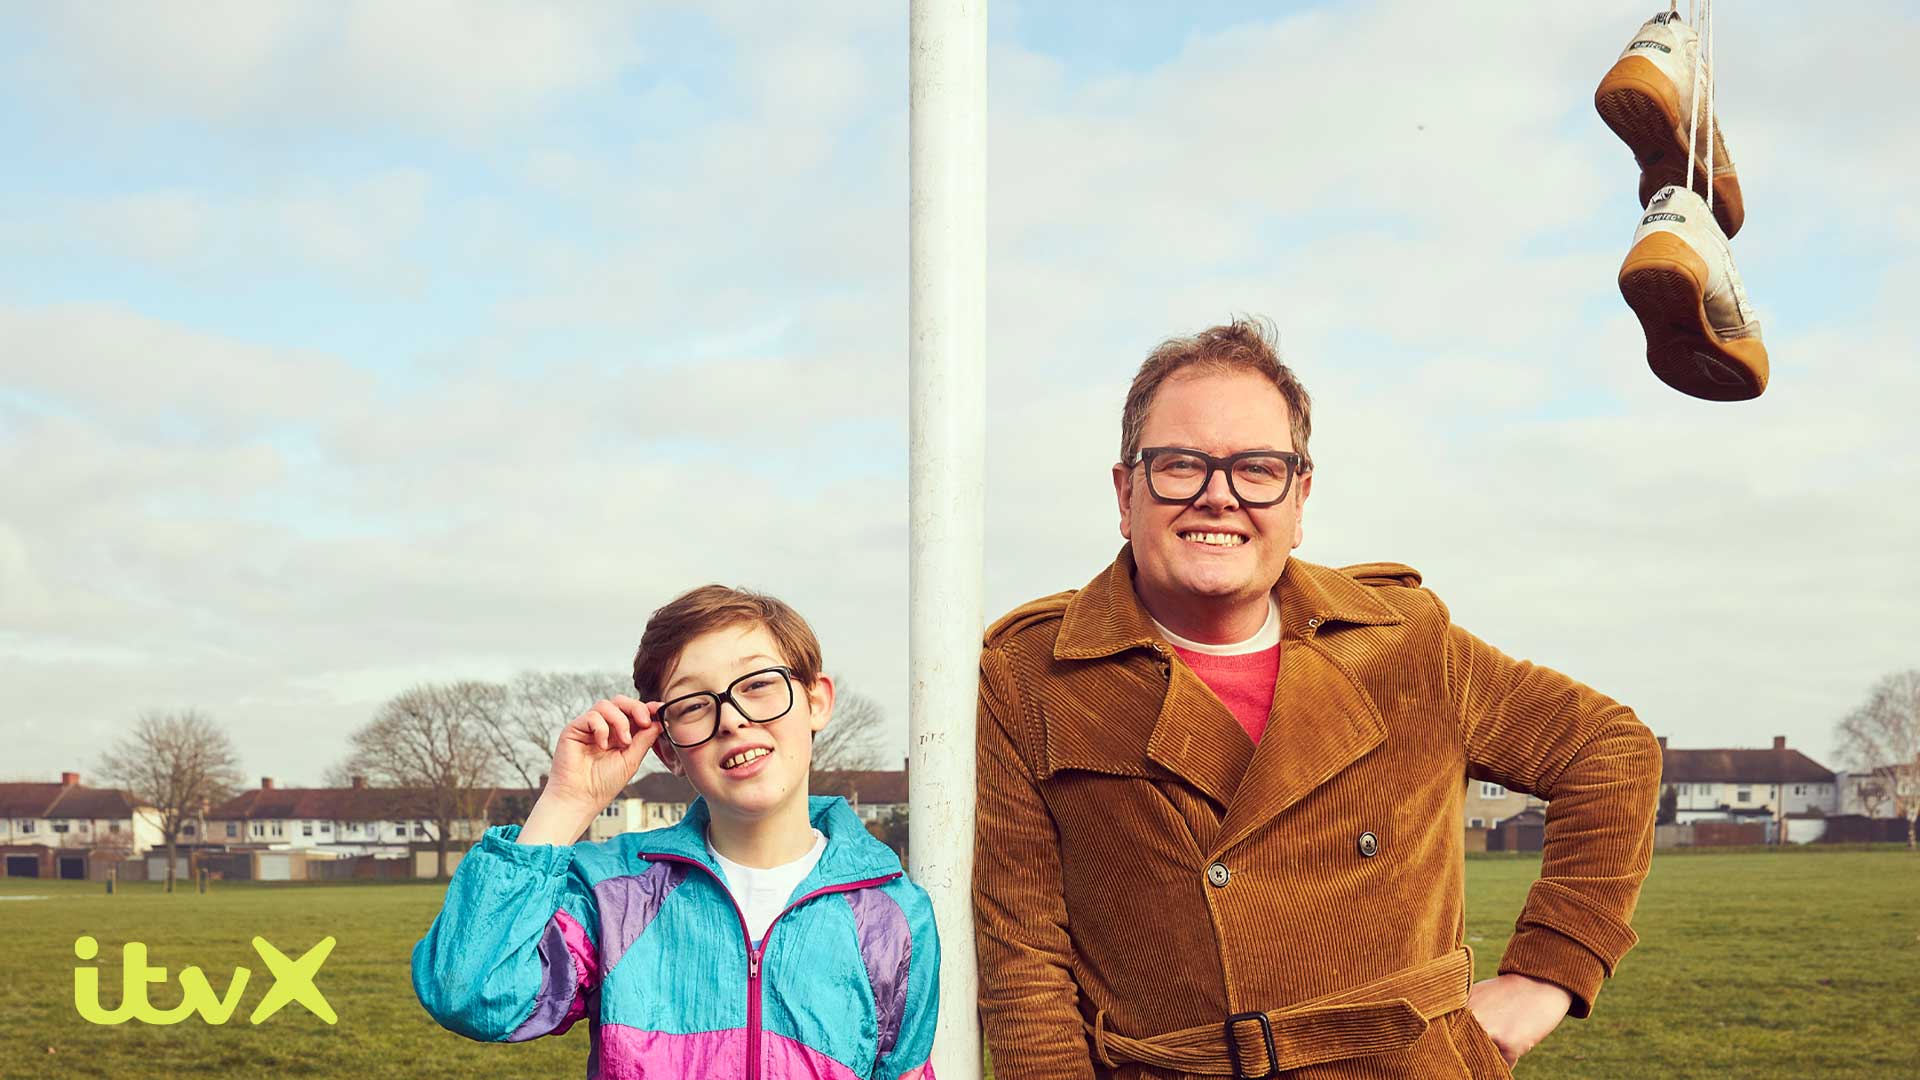 Alan Carr leaning against a goal post in a brown corduroy coat. A young Alan in a shellsuit on his left